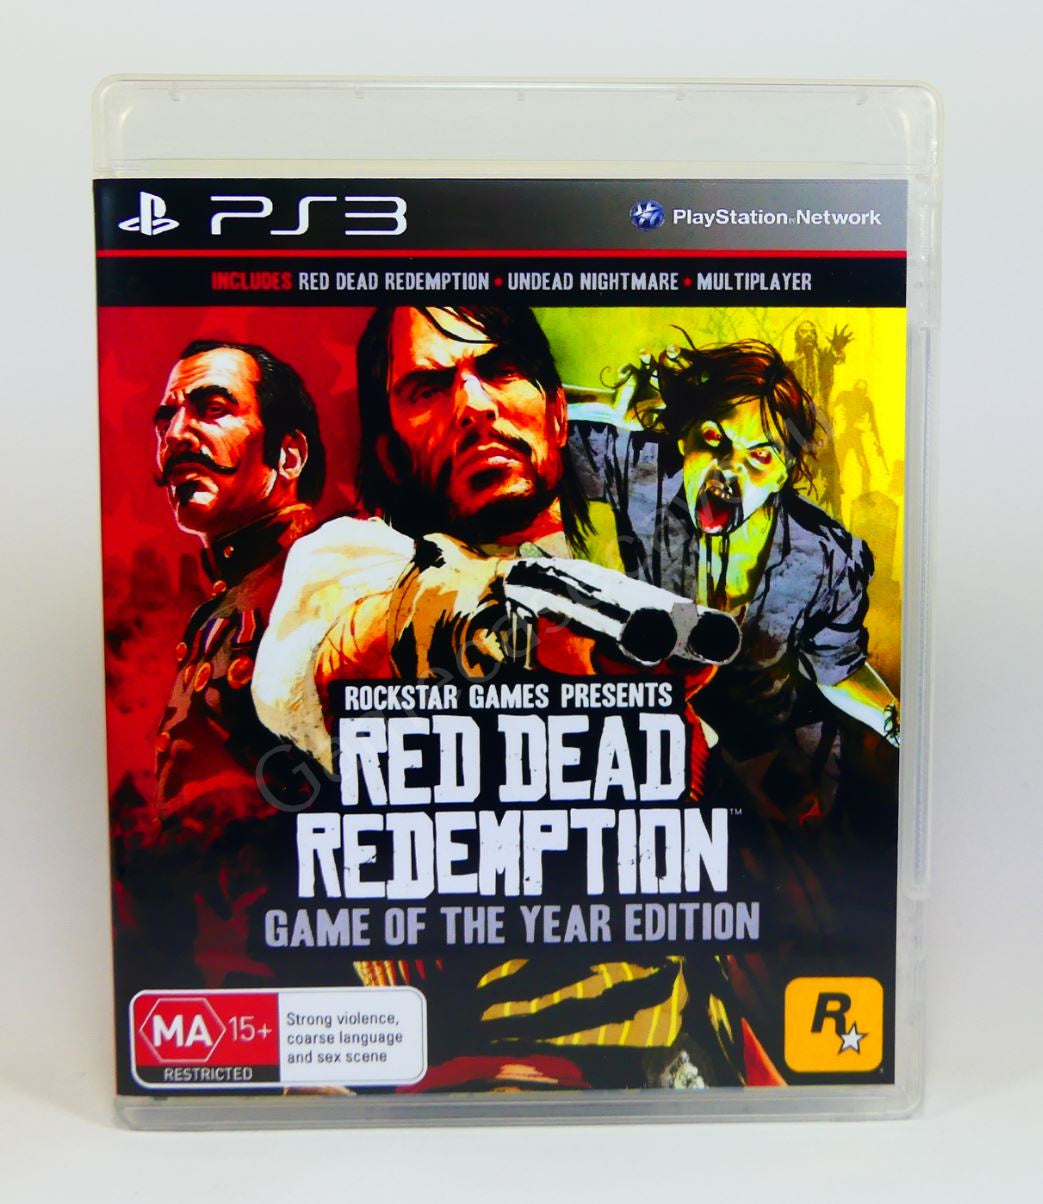 Red Dead Redemption Game of the Year Edition - PS3 Replacement Case